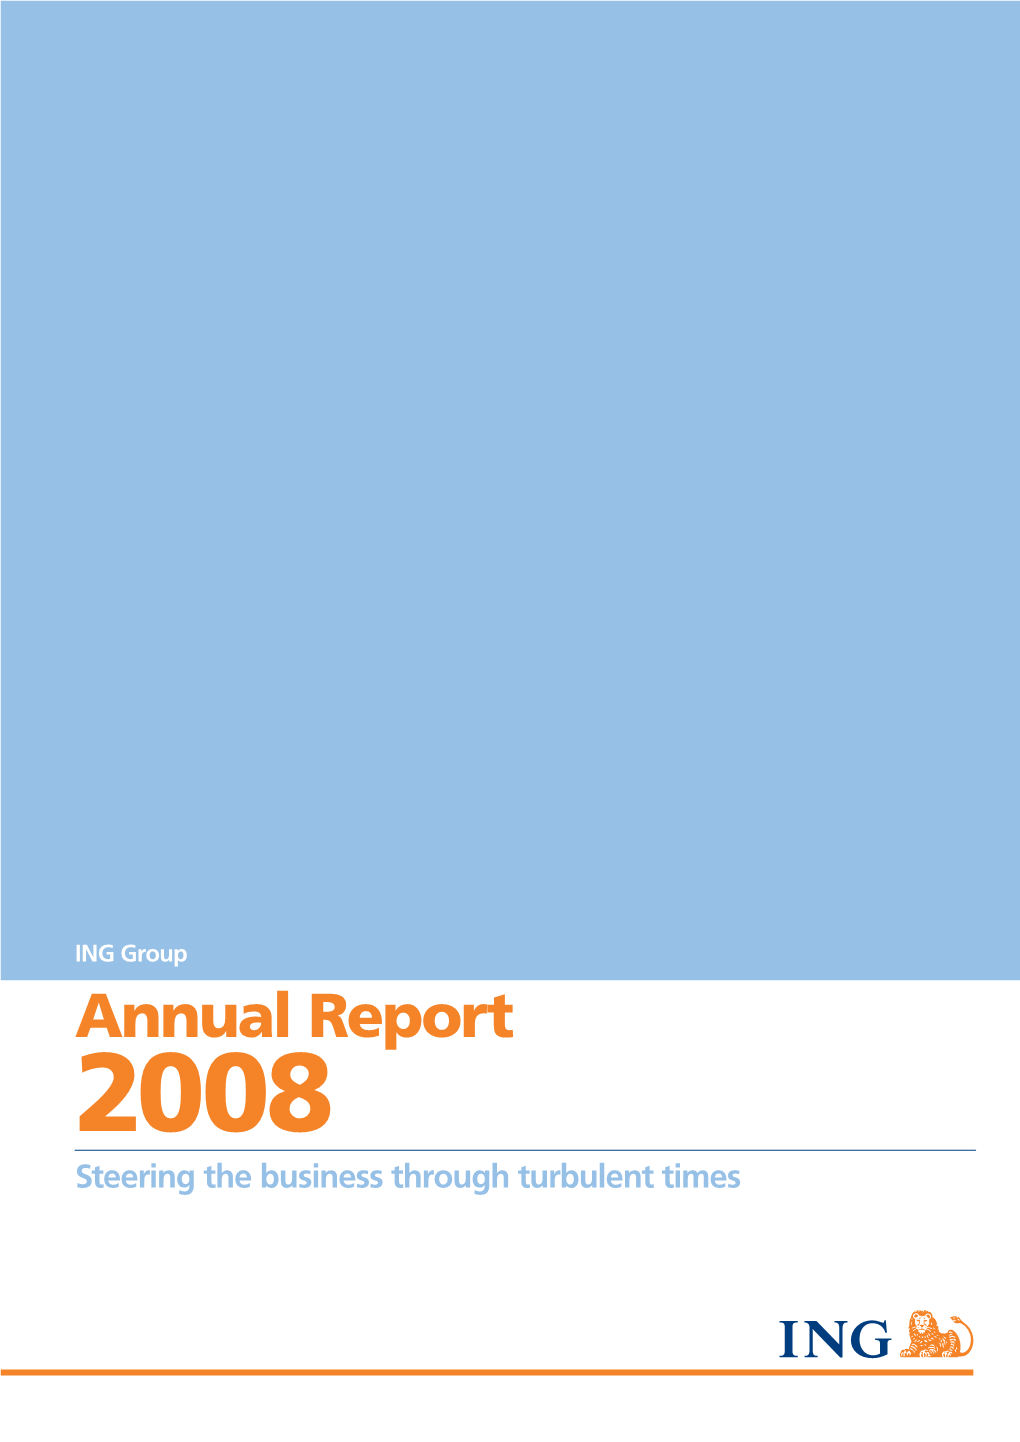 Annual Report 2008 Steering the Business Through Turbulent Times